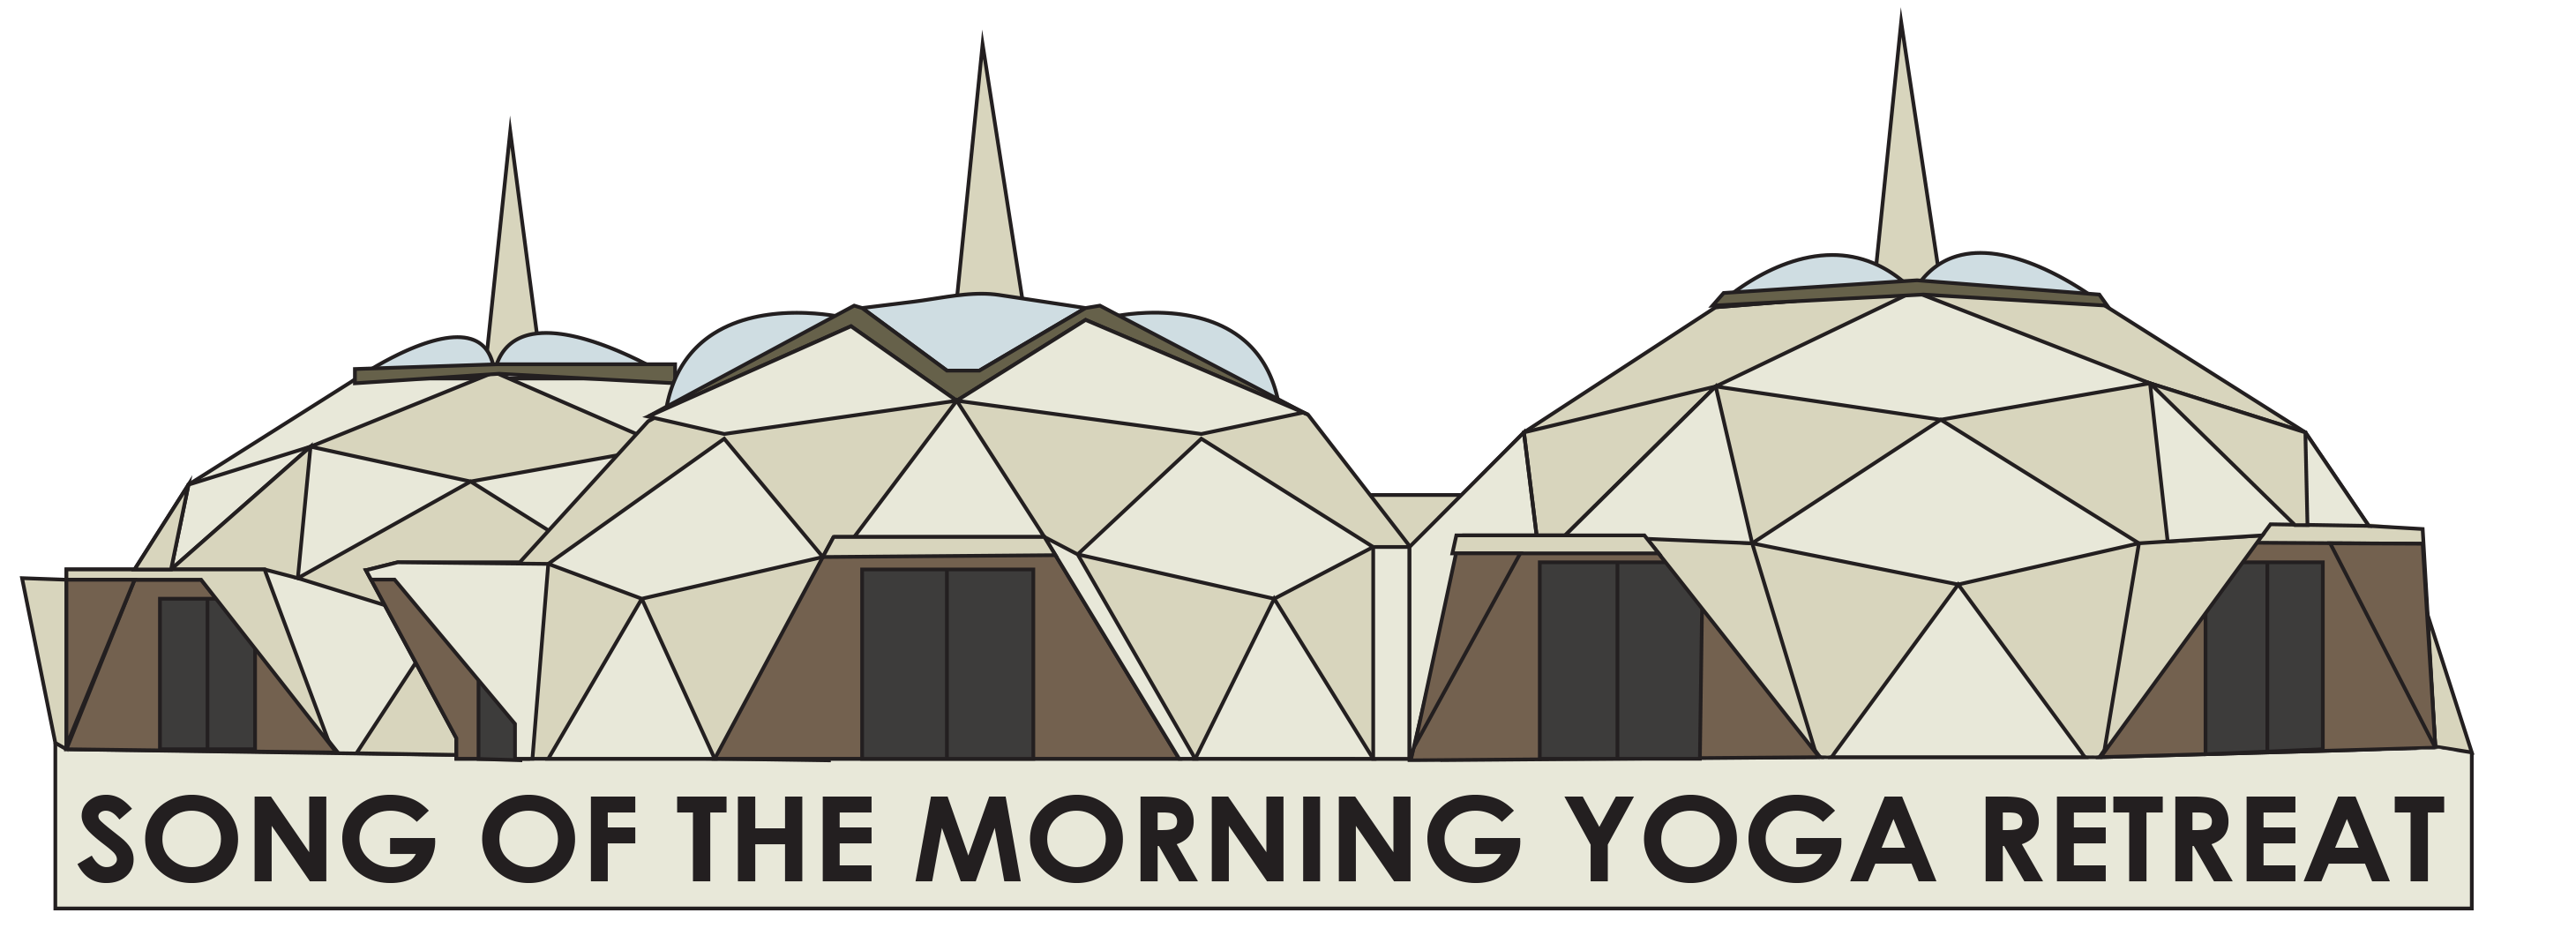 Design of the Domes for pin